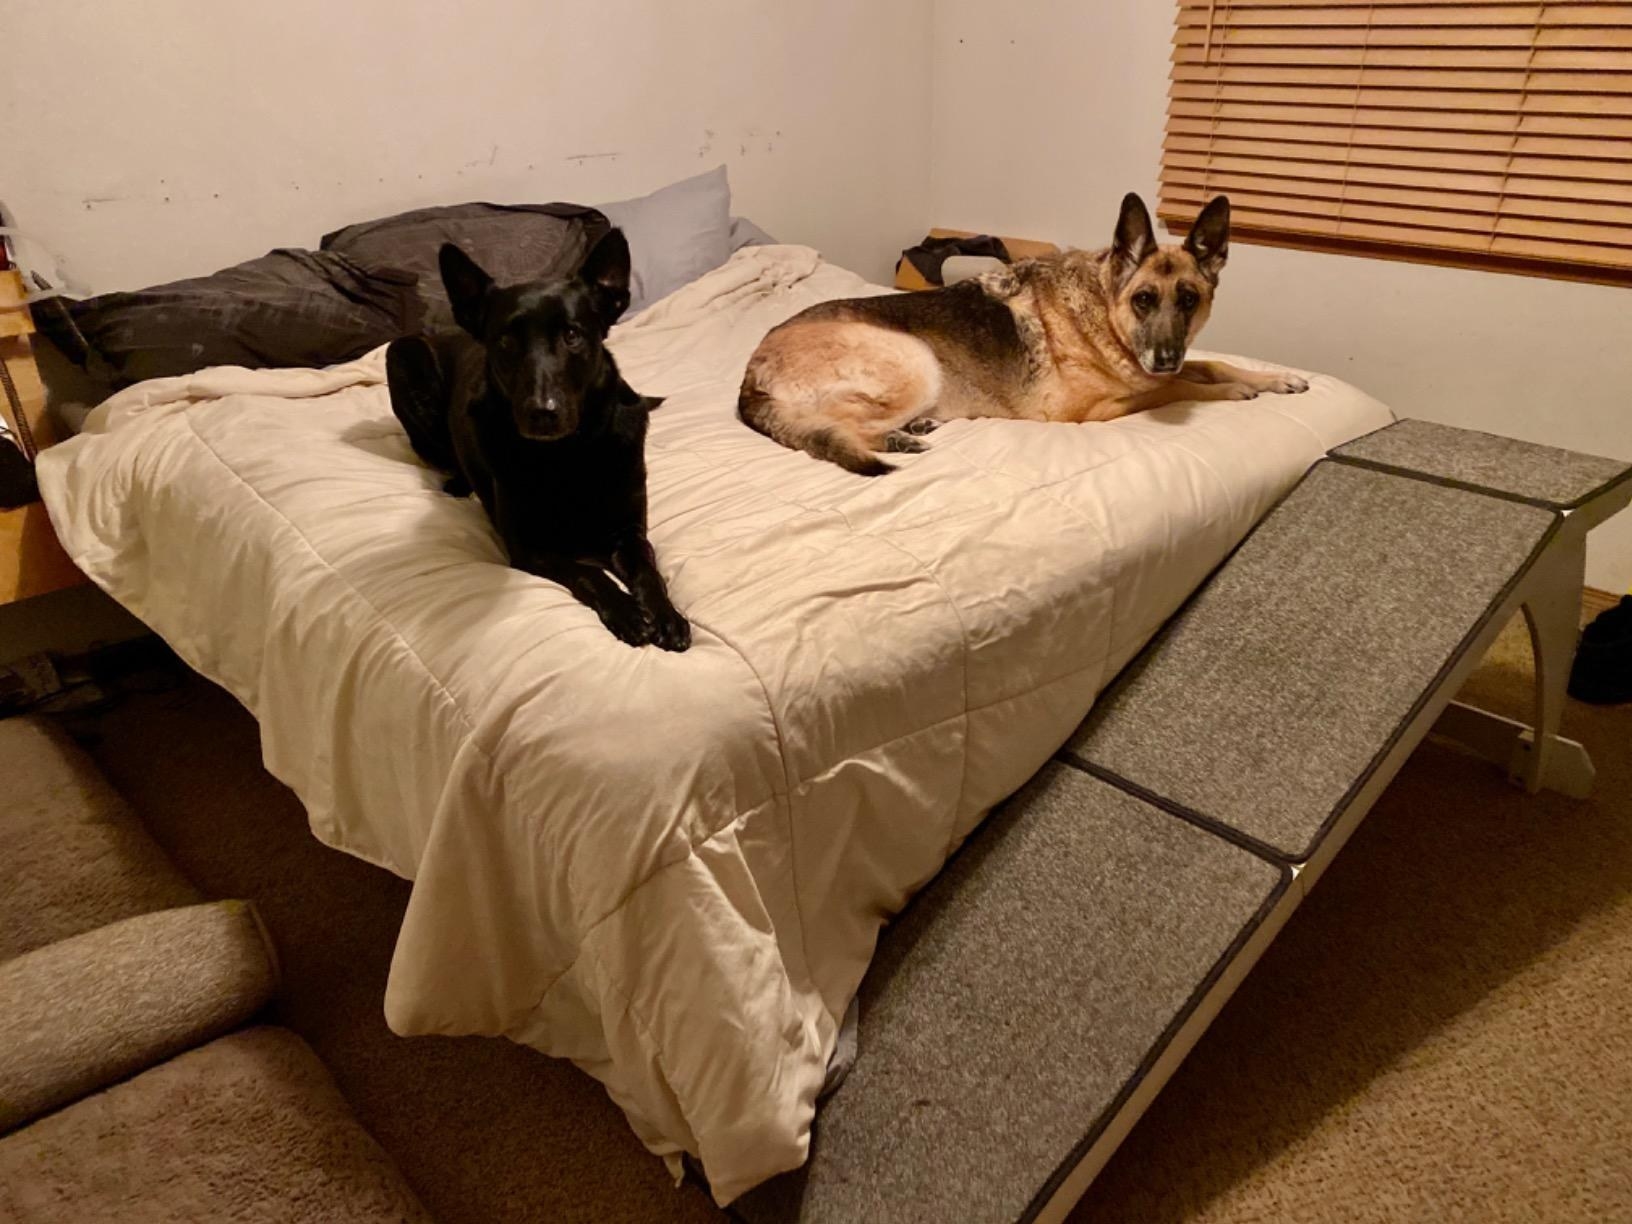 The ramp placed against the bed next to two dogs